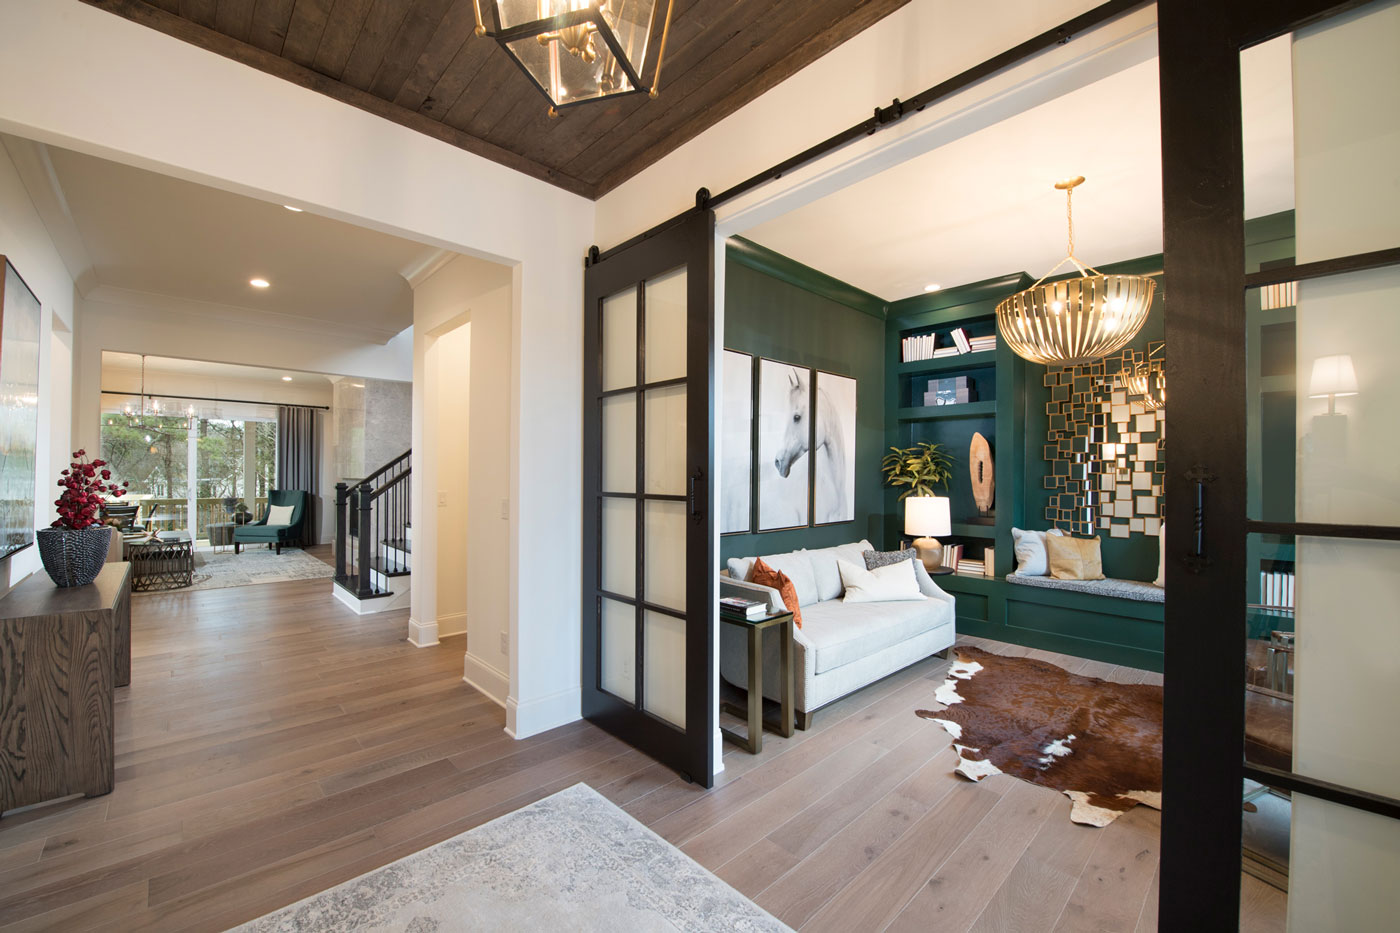 Georgia flex room designed with dark green walls, cow hide rug, horse picture, and contrasting finishes.